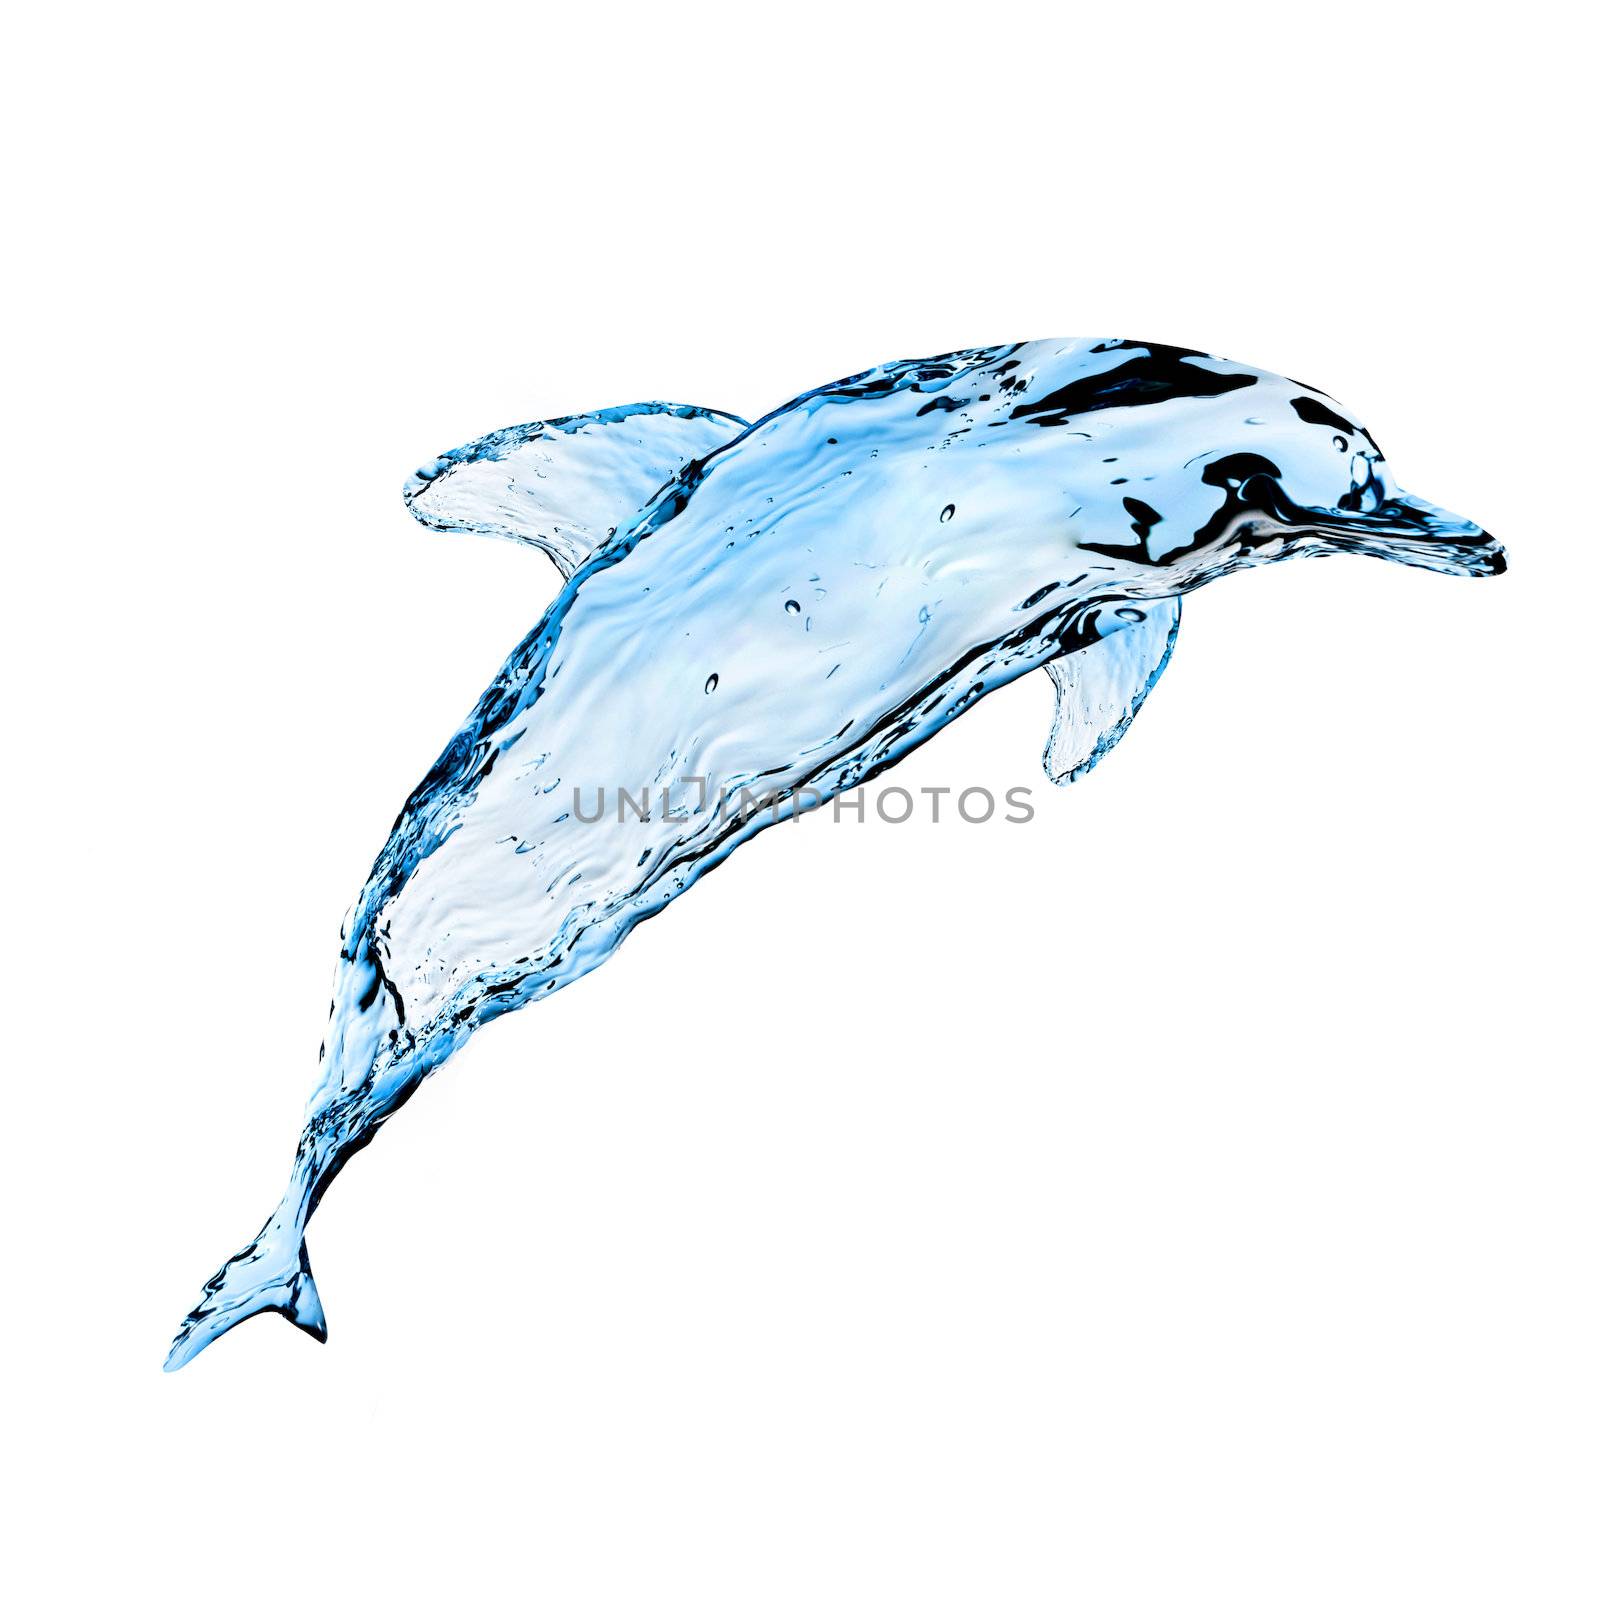 Dolphin from splashes of water on a white background